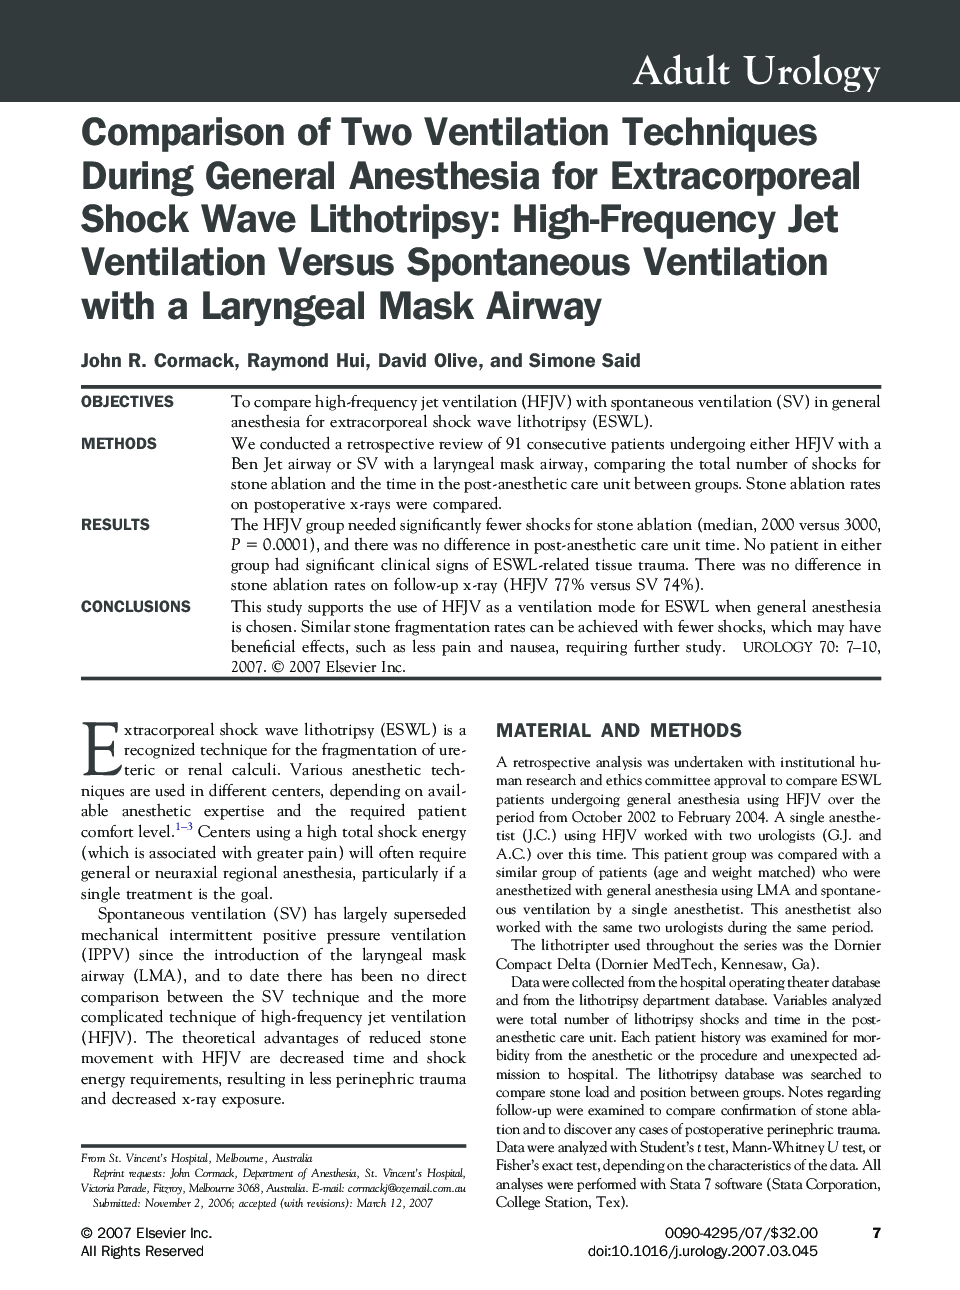 Comparison of Two Ventilation Techniques During General Anesthesia for Extracorporeal Shock Wave Lithotripsy: High-Frequency Jet Ventilation Versus Spontaneous Ventilation with a Laryngeal Mask Airway